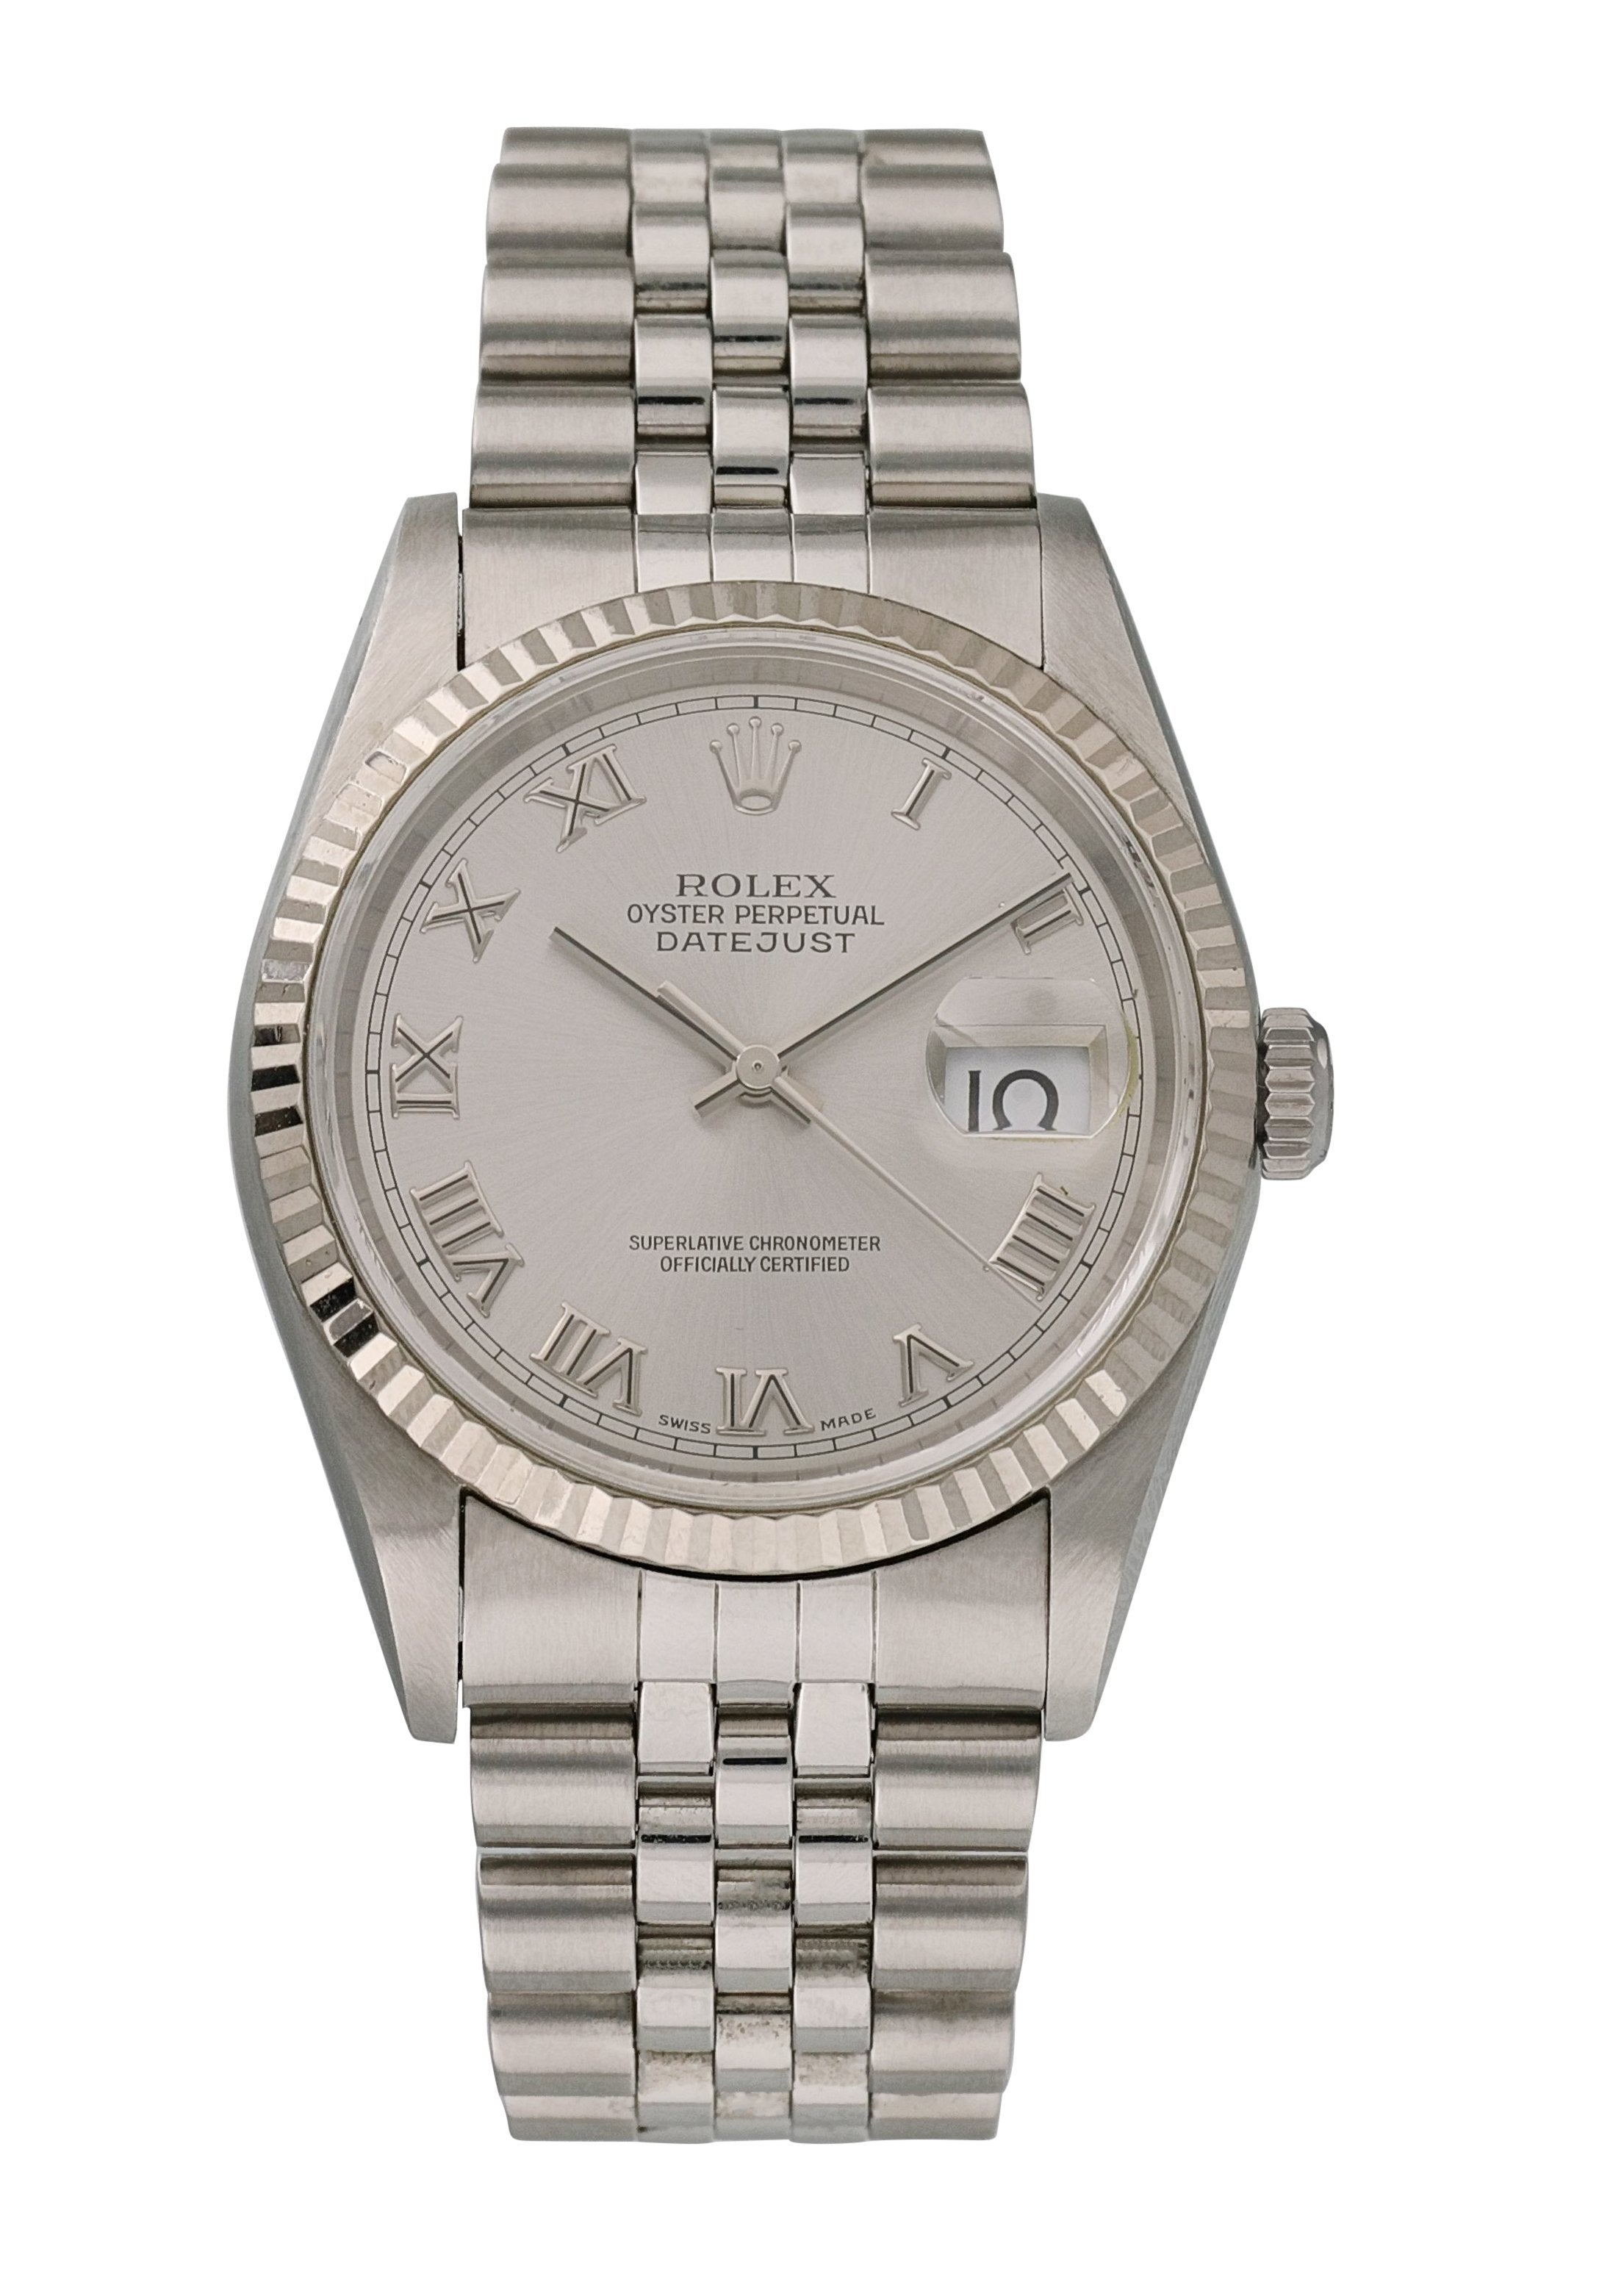 Perpetual Datejust 16234 Watch